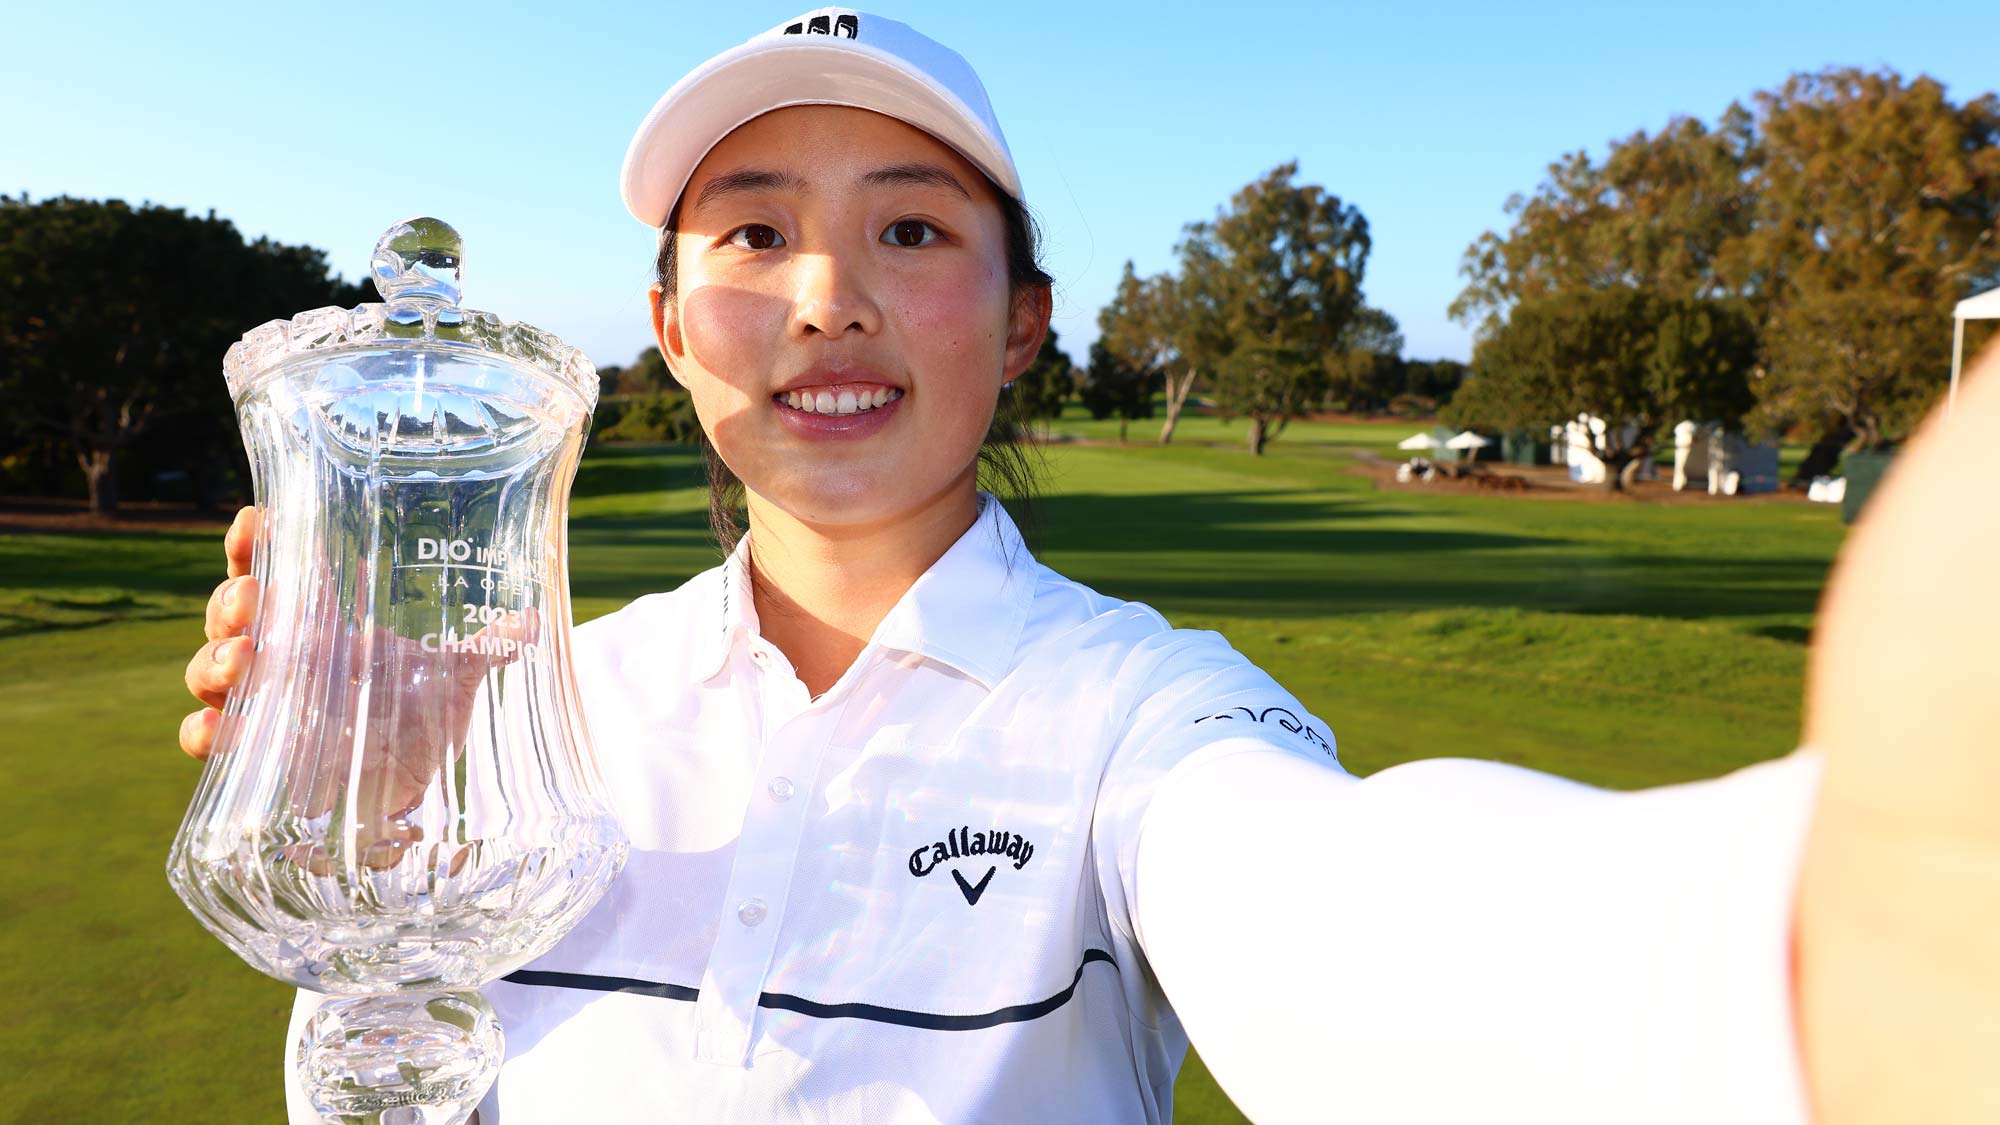 Ruoning Yin of China imitates a selfie as she poses with the trophy after winning the DIO Implant LA Open